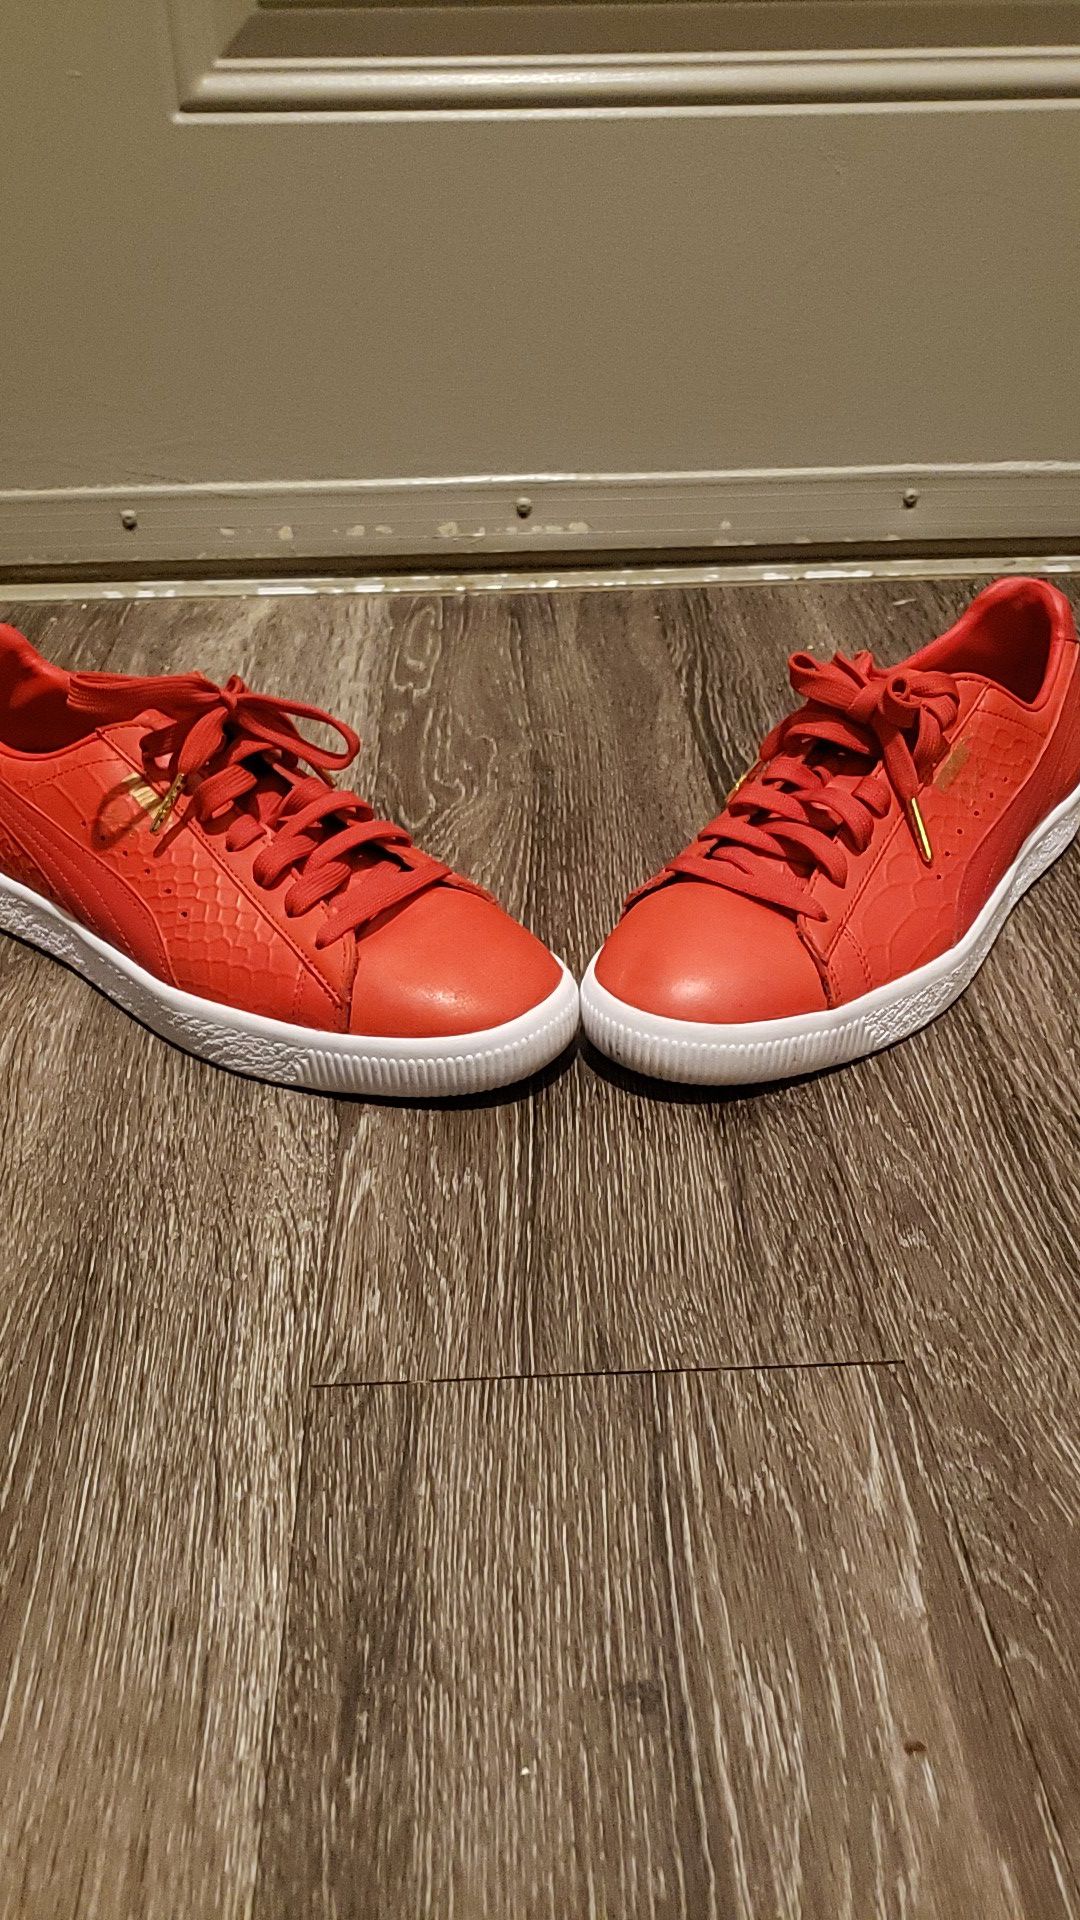 Red Special Edition Clyde Pumas Size 9 $65